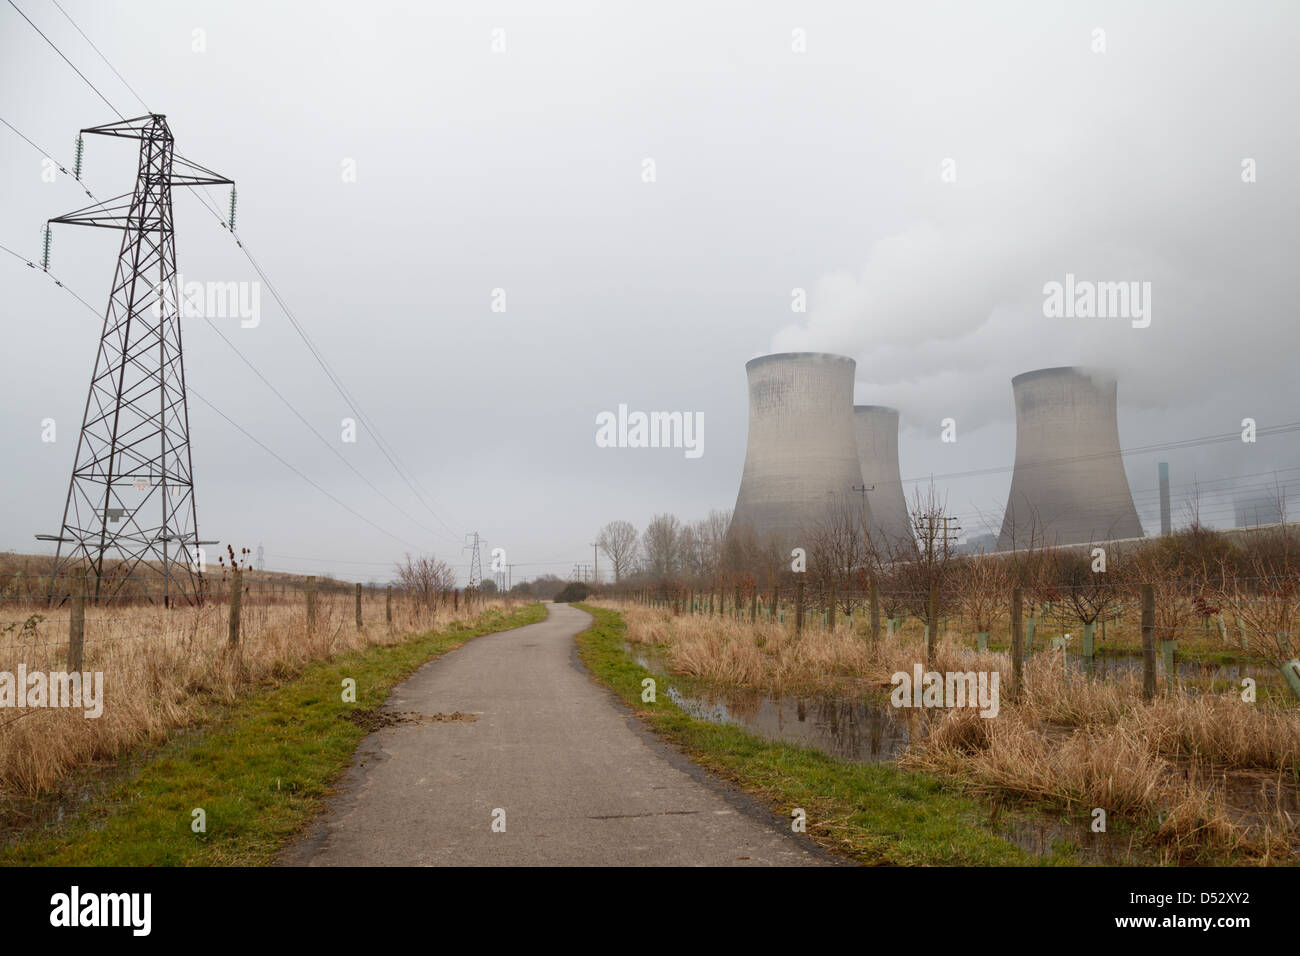 Didcot A power station in Oxfordshire Stock Photo